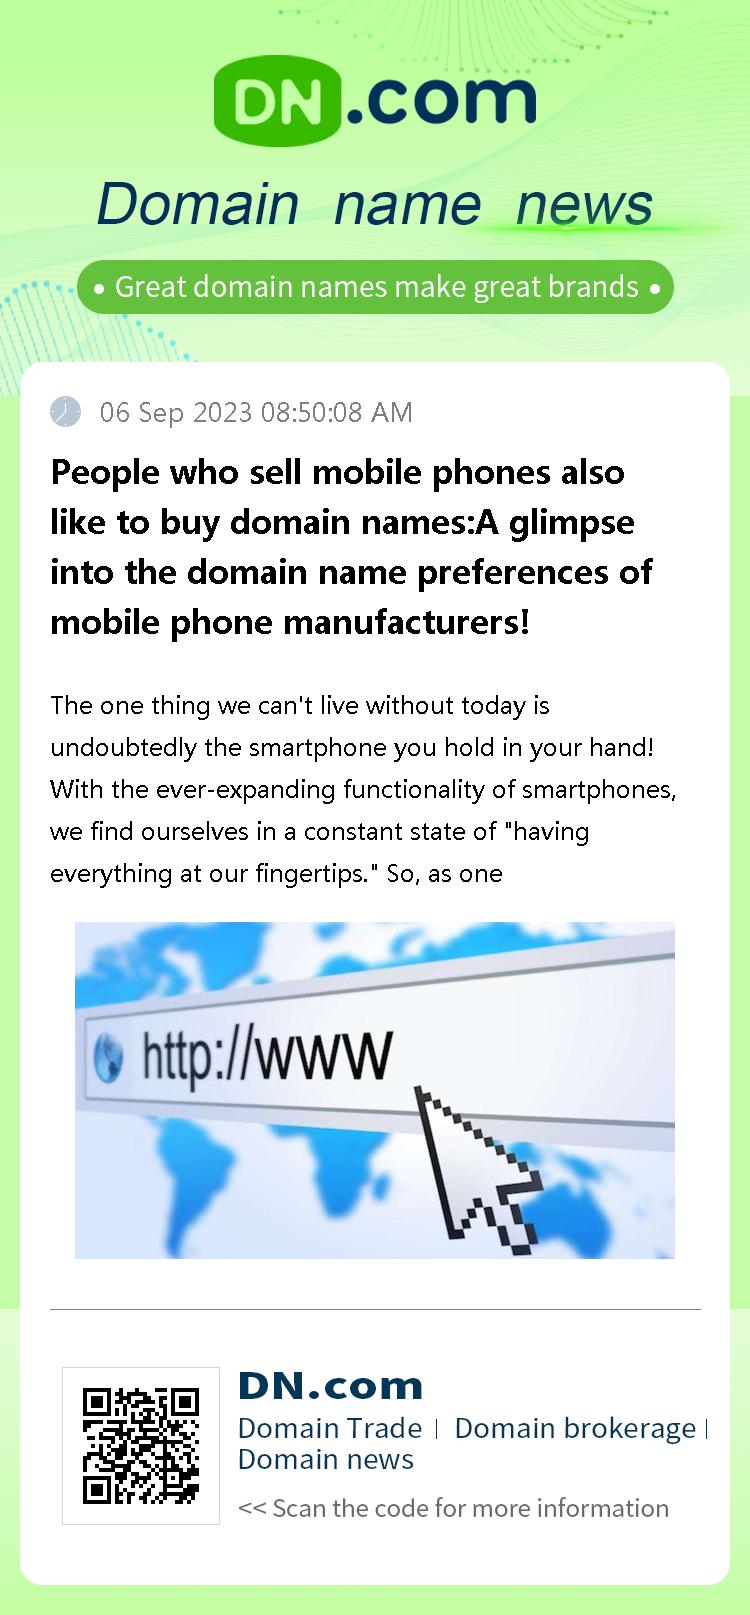 People who sell mobile phones also like to buy domain names:A glimpse into the domain name preferences of mobile phone manufacturers!